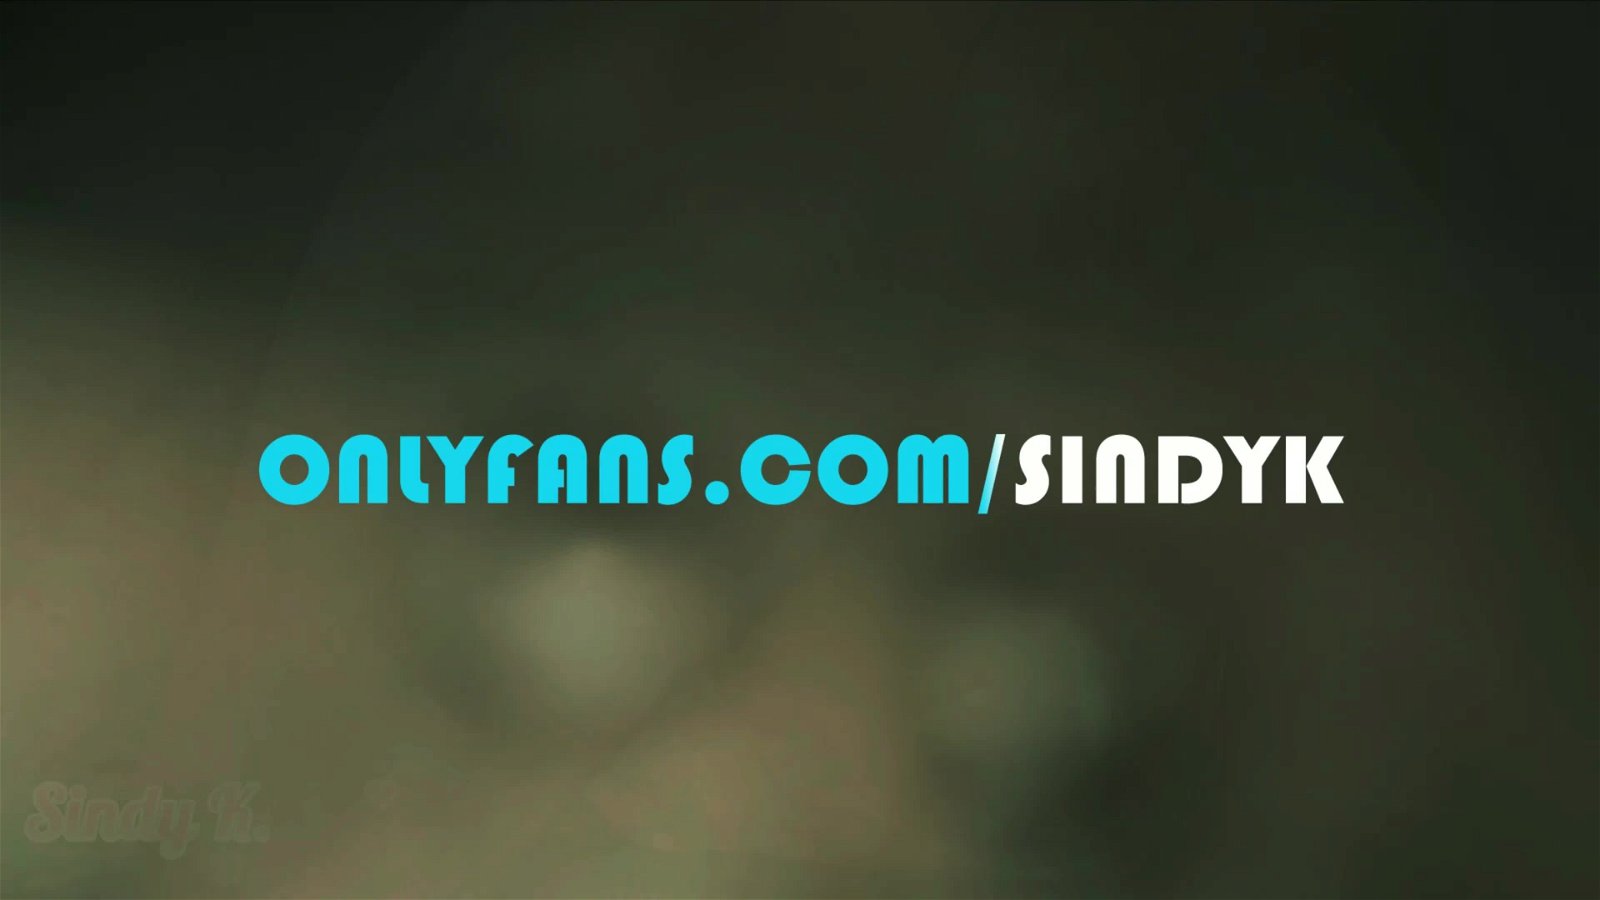 Video by Sindy Cox with the username @sindycox, who is a star user,  April 28, 2023 at 1:53 AM and the text says '7 days free trial for the first 5 subscribers
https://onlyfans.com/action/trial/uywhwjf0a78mbaro4zbggqv3bn75qx8g'